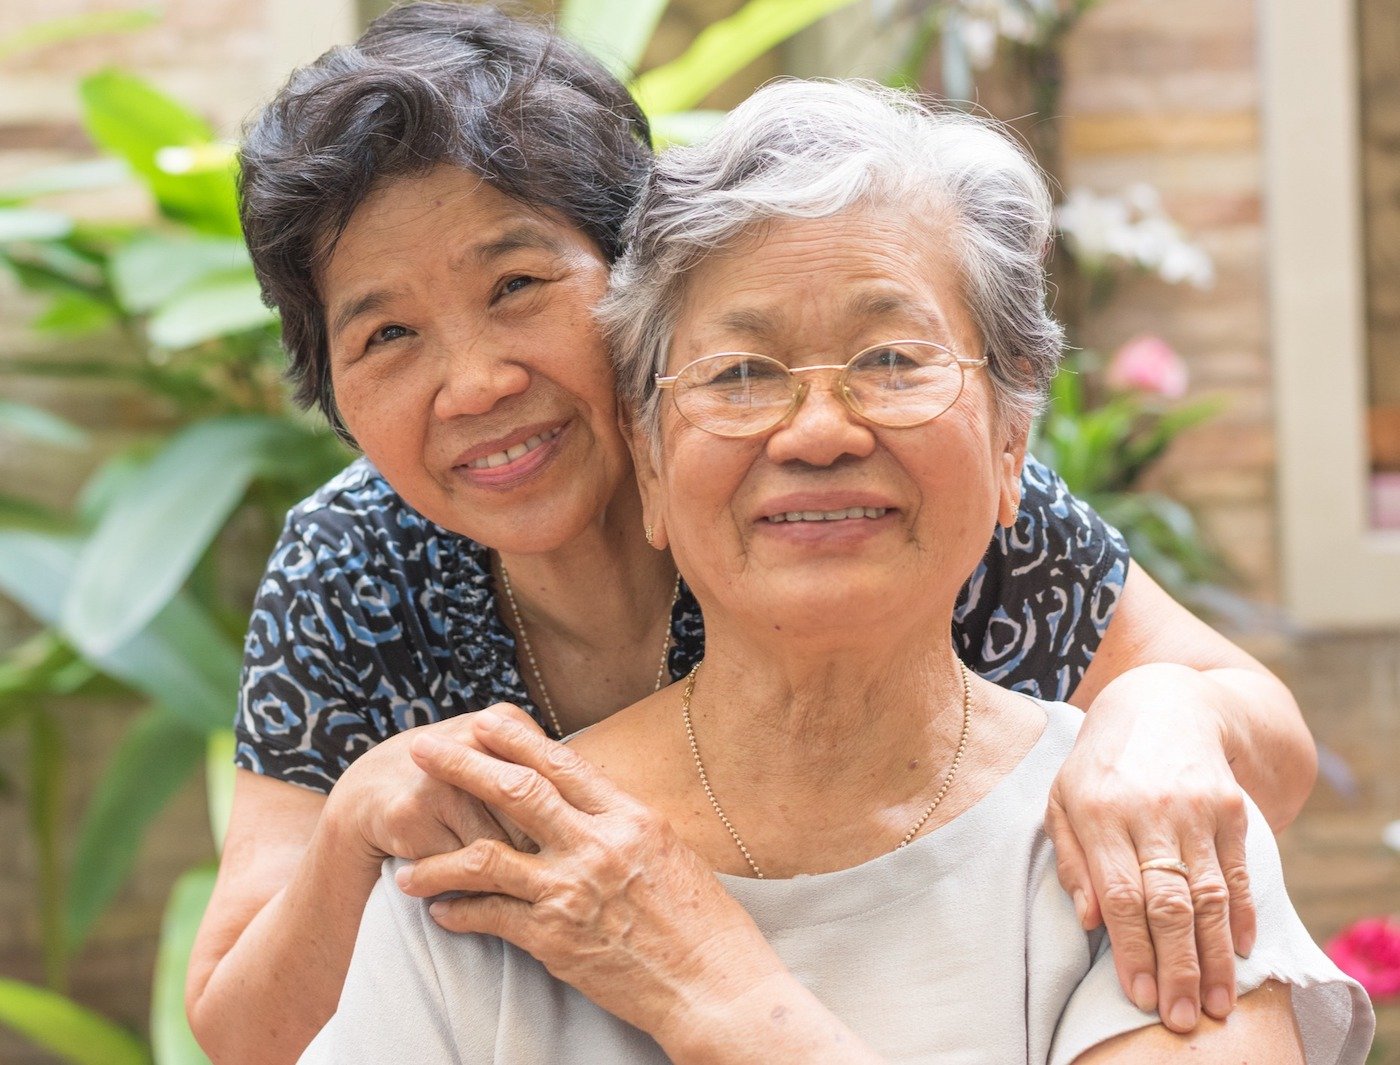 Two senior women embracing and smiling at the camera